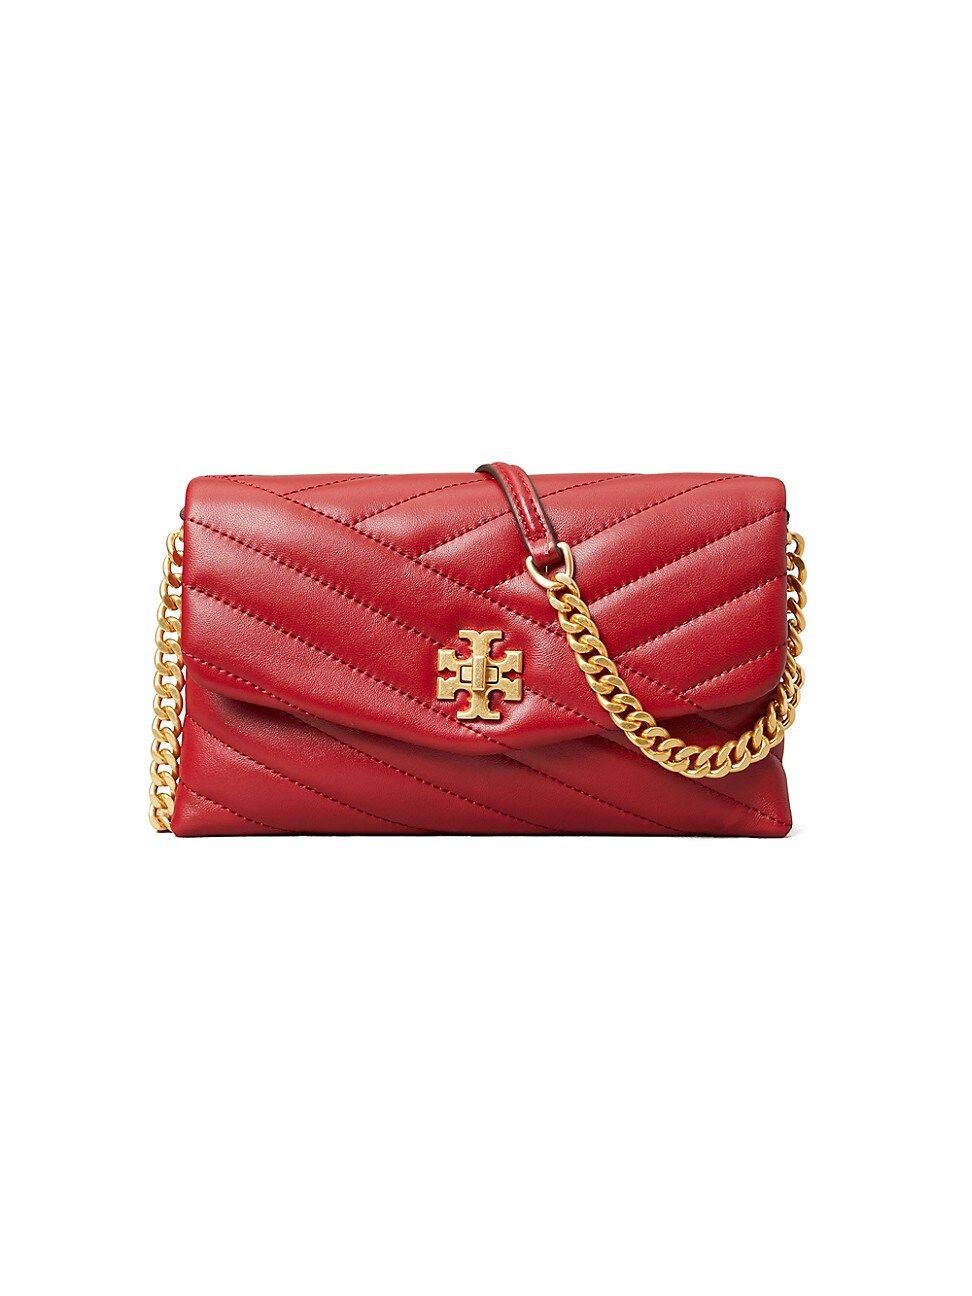 Tory Burch Women's Kira Chevron Leather Wallet-On-Chain - Red | Saks Fifth Avenue